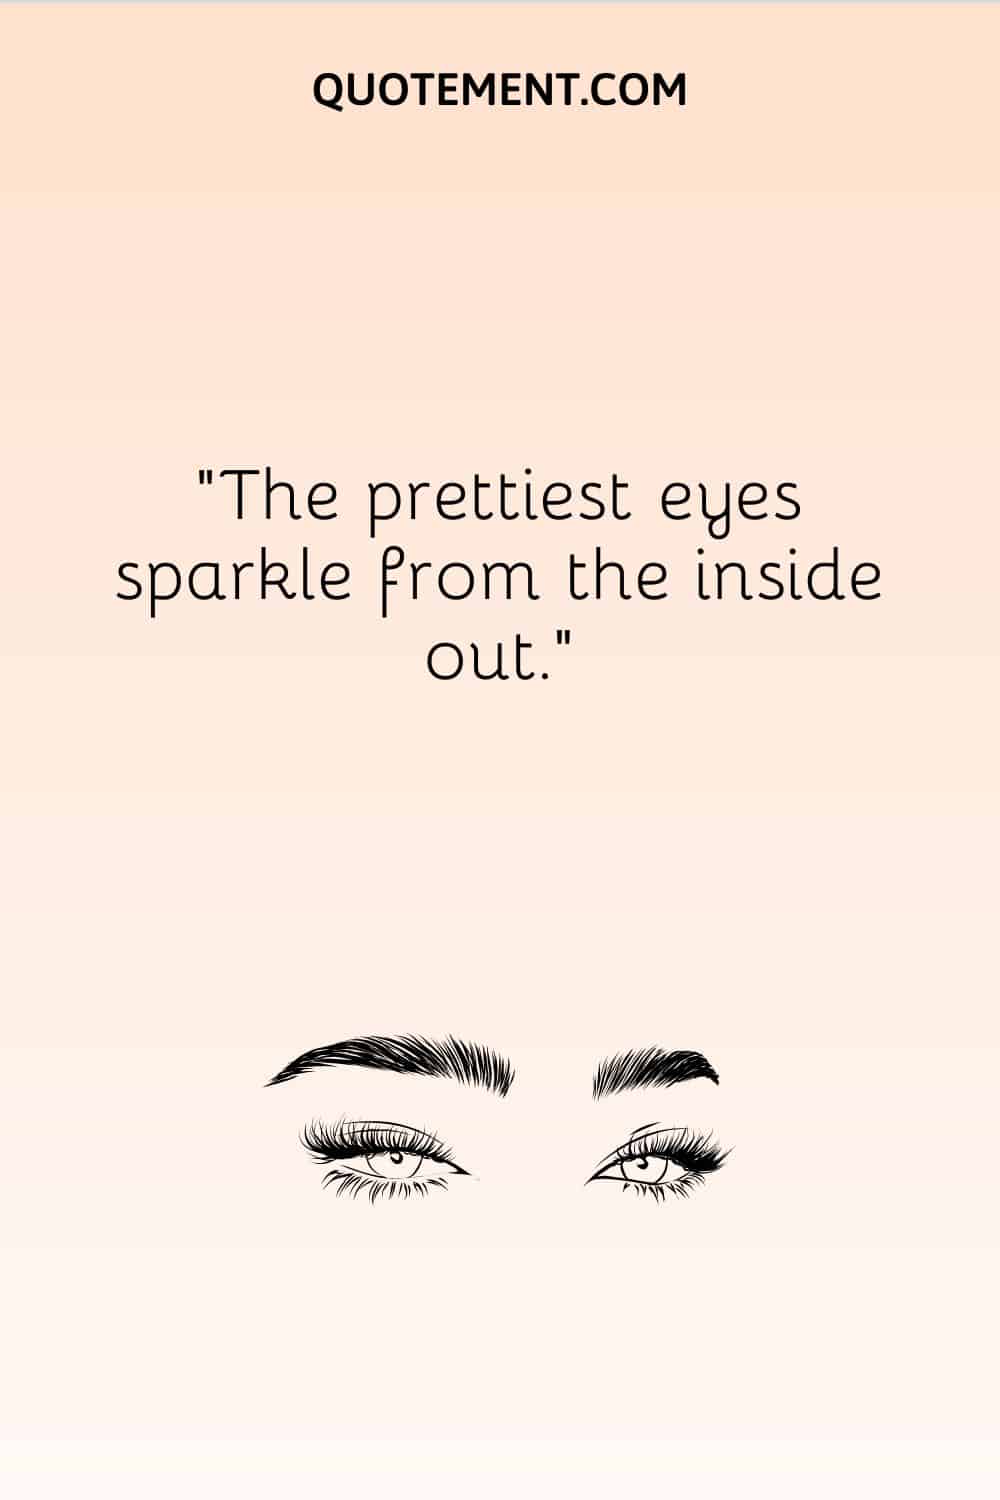 The prettiest eyes sparkle from the inside out.